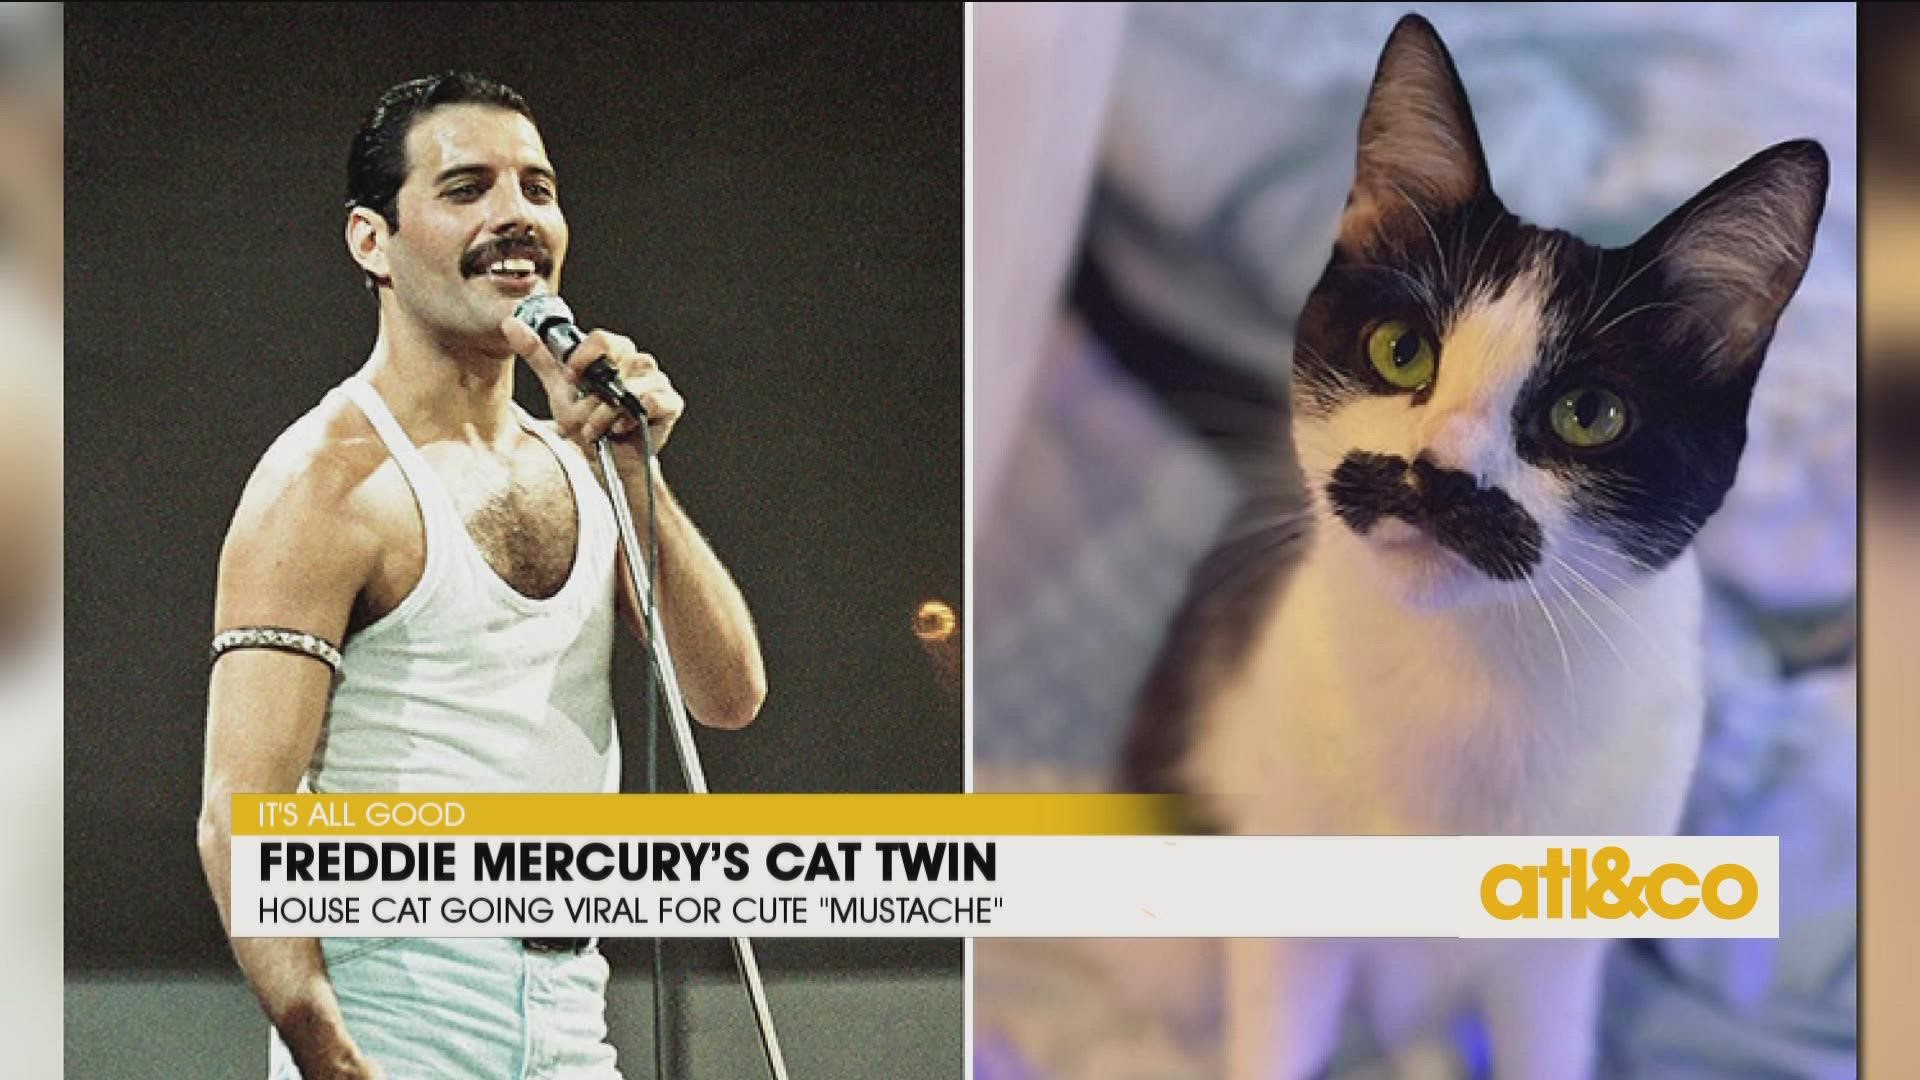 1-year-old house cat Mostaccioli bears a striking resembling to late great Queen frontman Freddie Mercury.